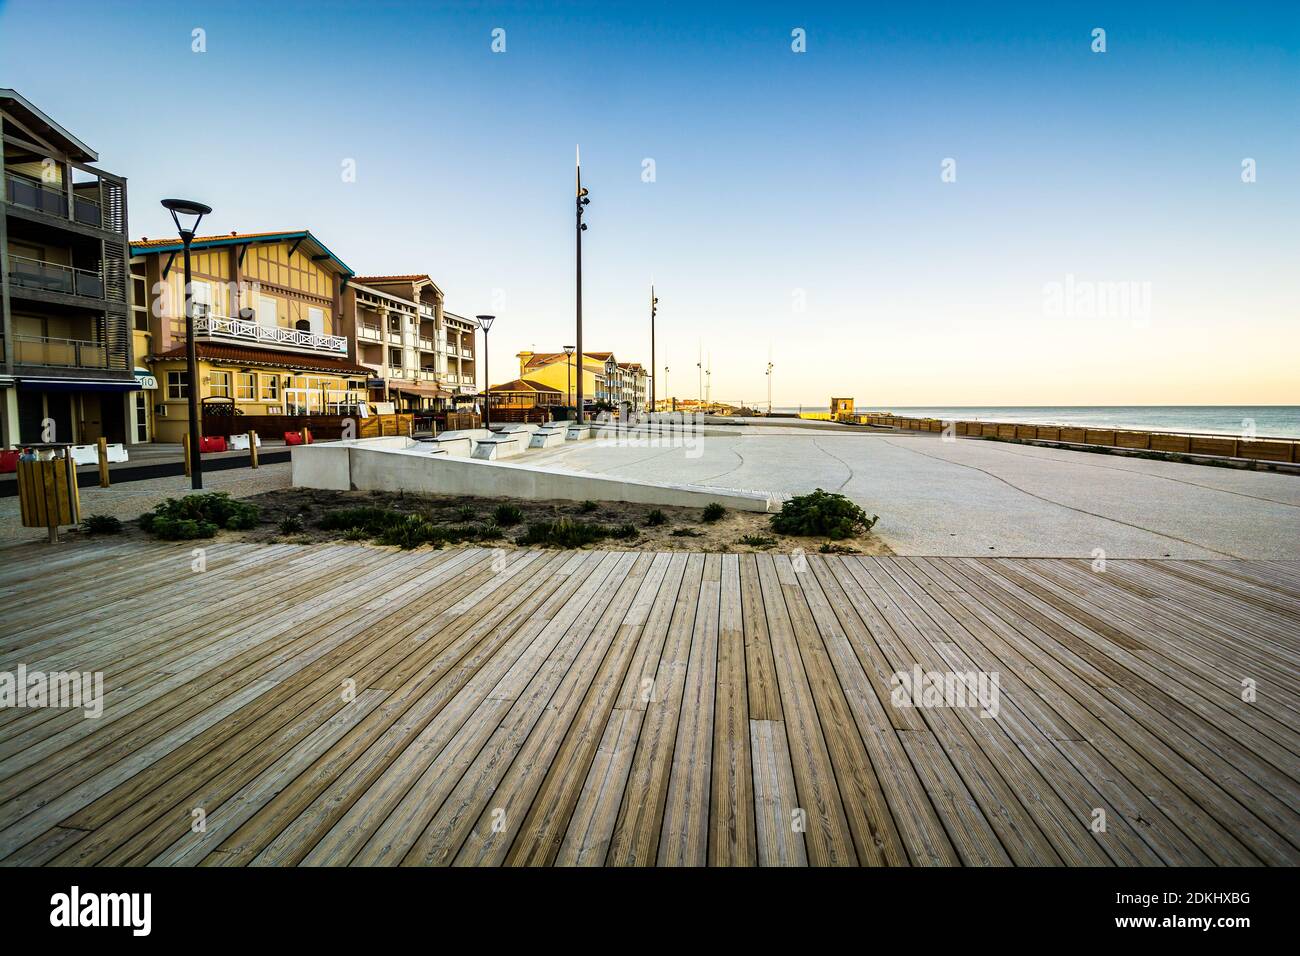 Mimizan Plage, France - April 06, 2020. Architectre by the beach on the shore of Atlantic ocean Stock Photo